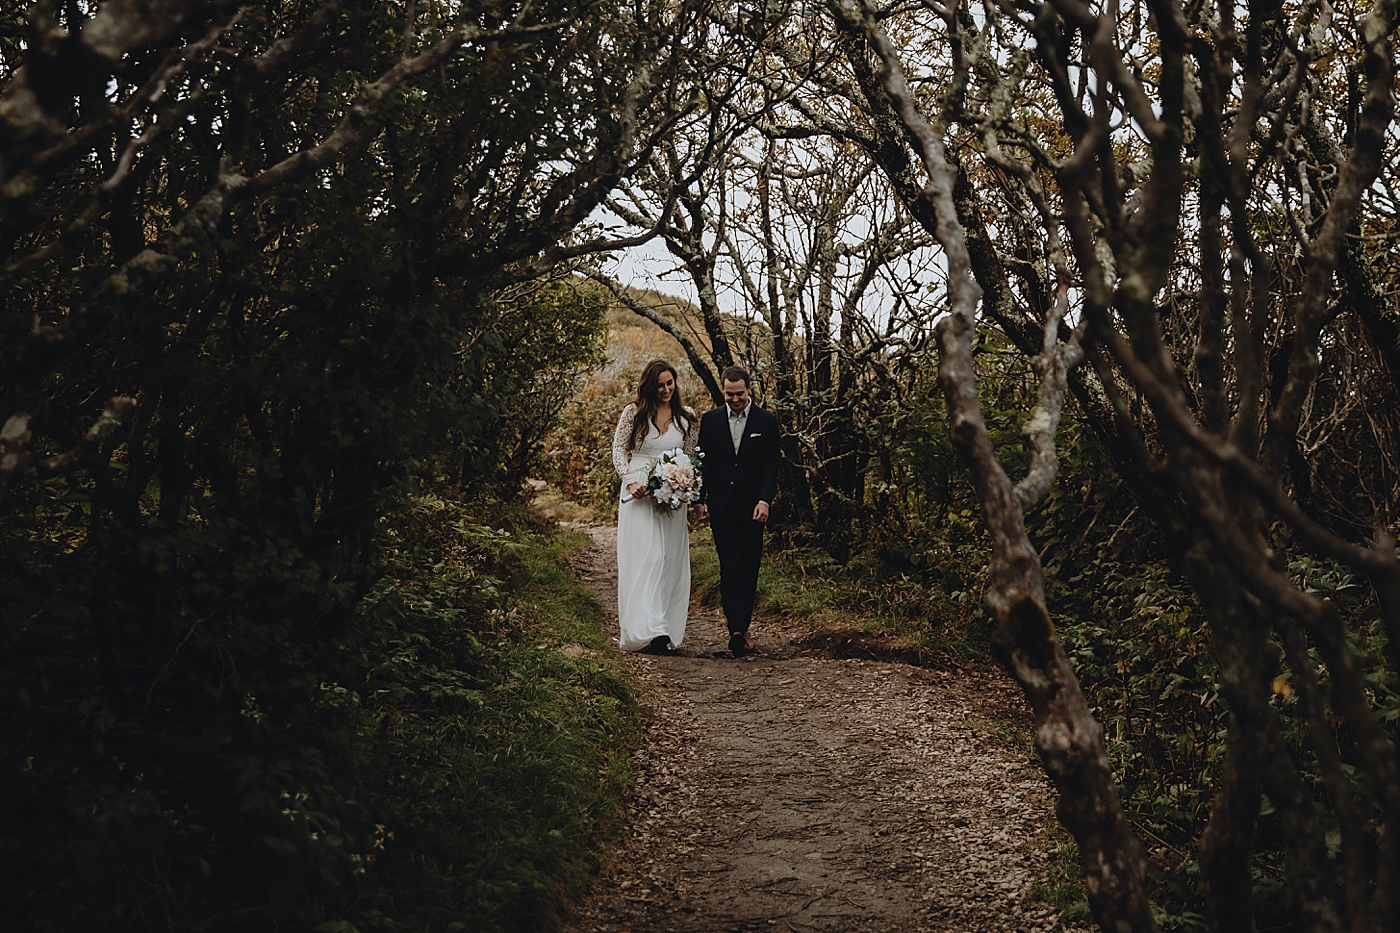 Bride and Groom walking down nature path Catawba Falls Asheville, NC Elopement Photography captured by Maggie Alvarez Photography